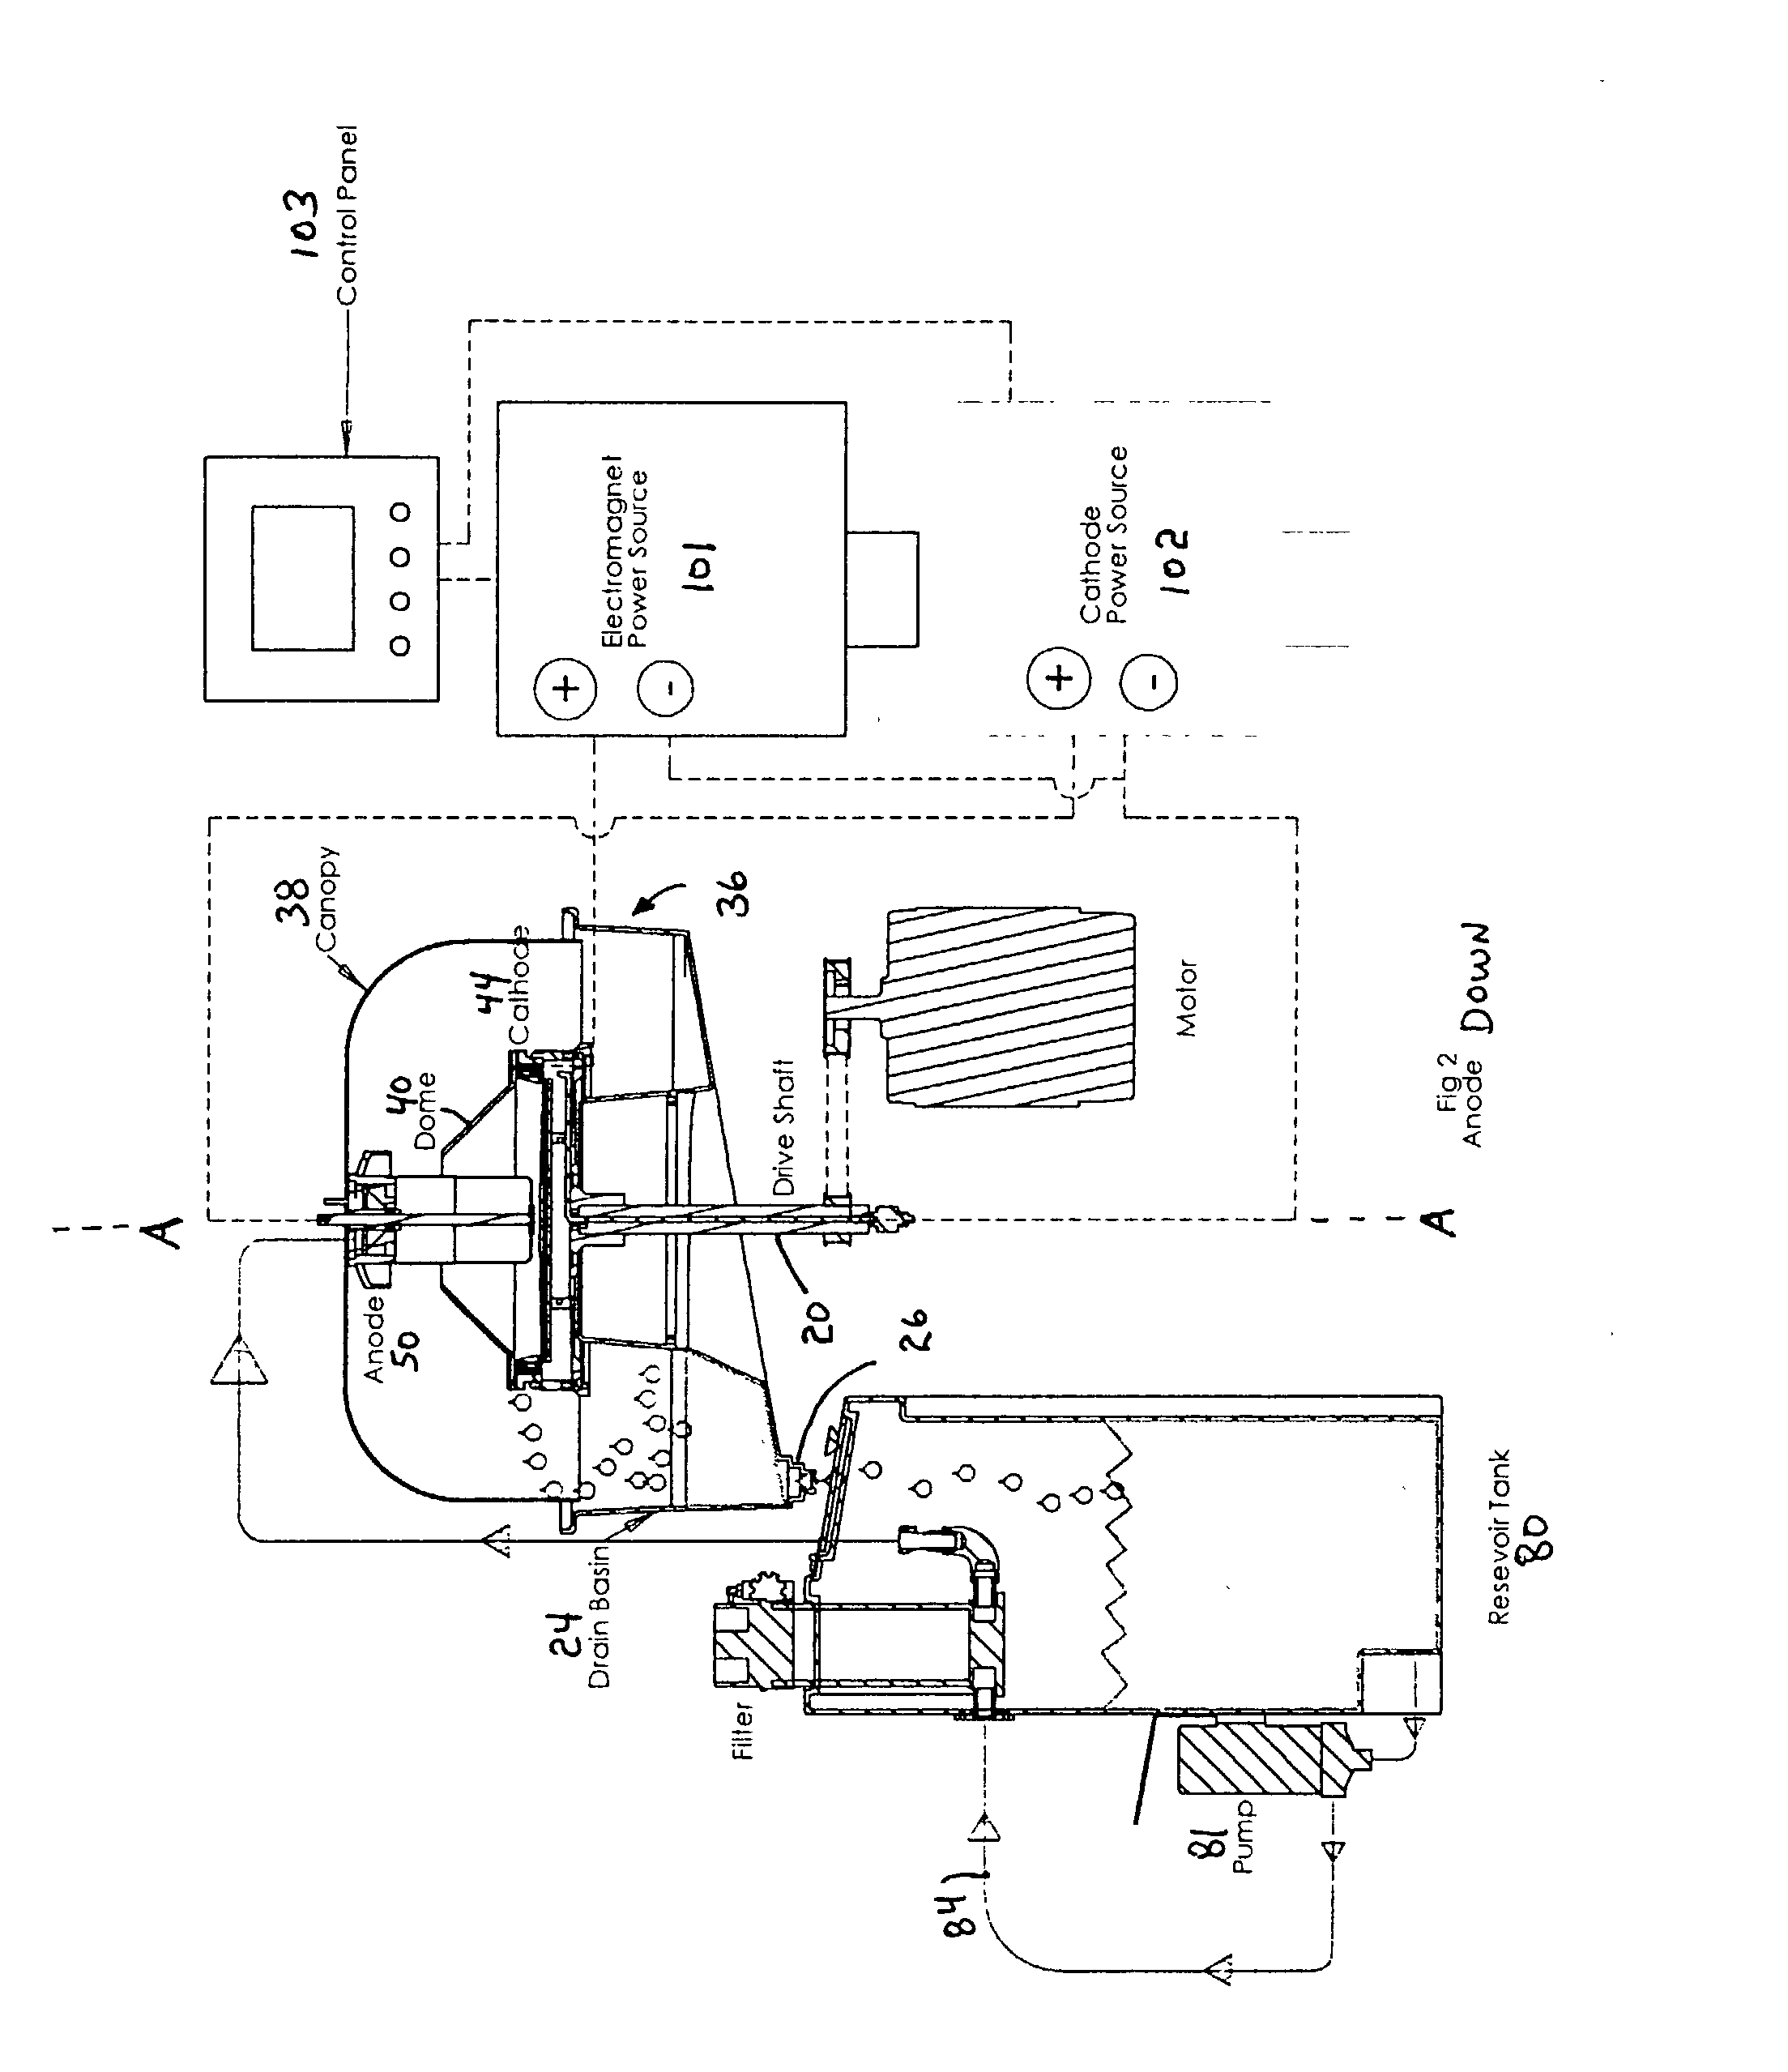 Electrodeposition apparatus and method using magnetic assistance and rotary cathode for ferrous and magnetic particles